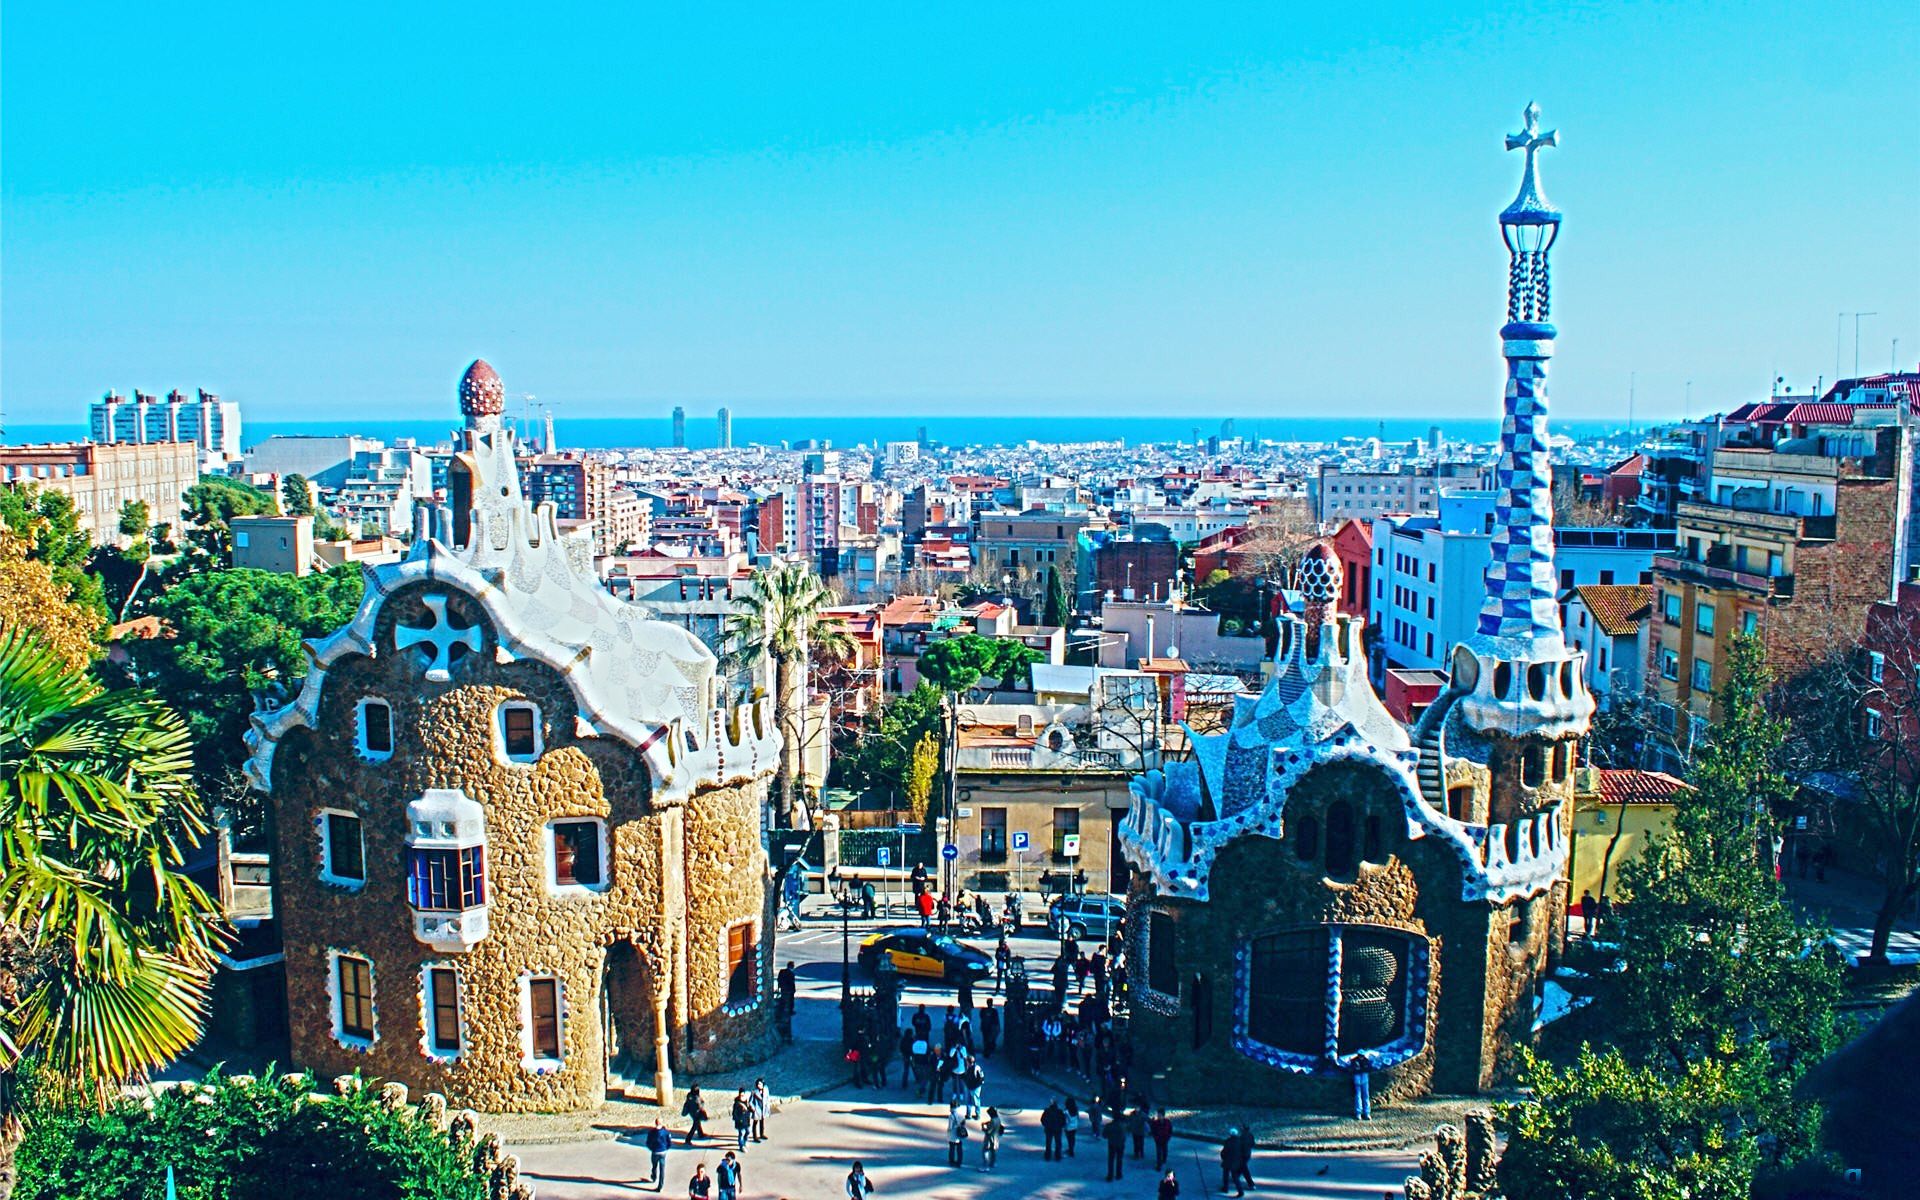 Wide P Park Guell Image Bank